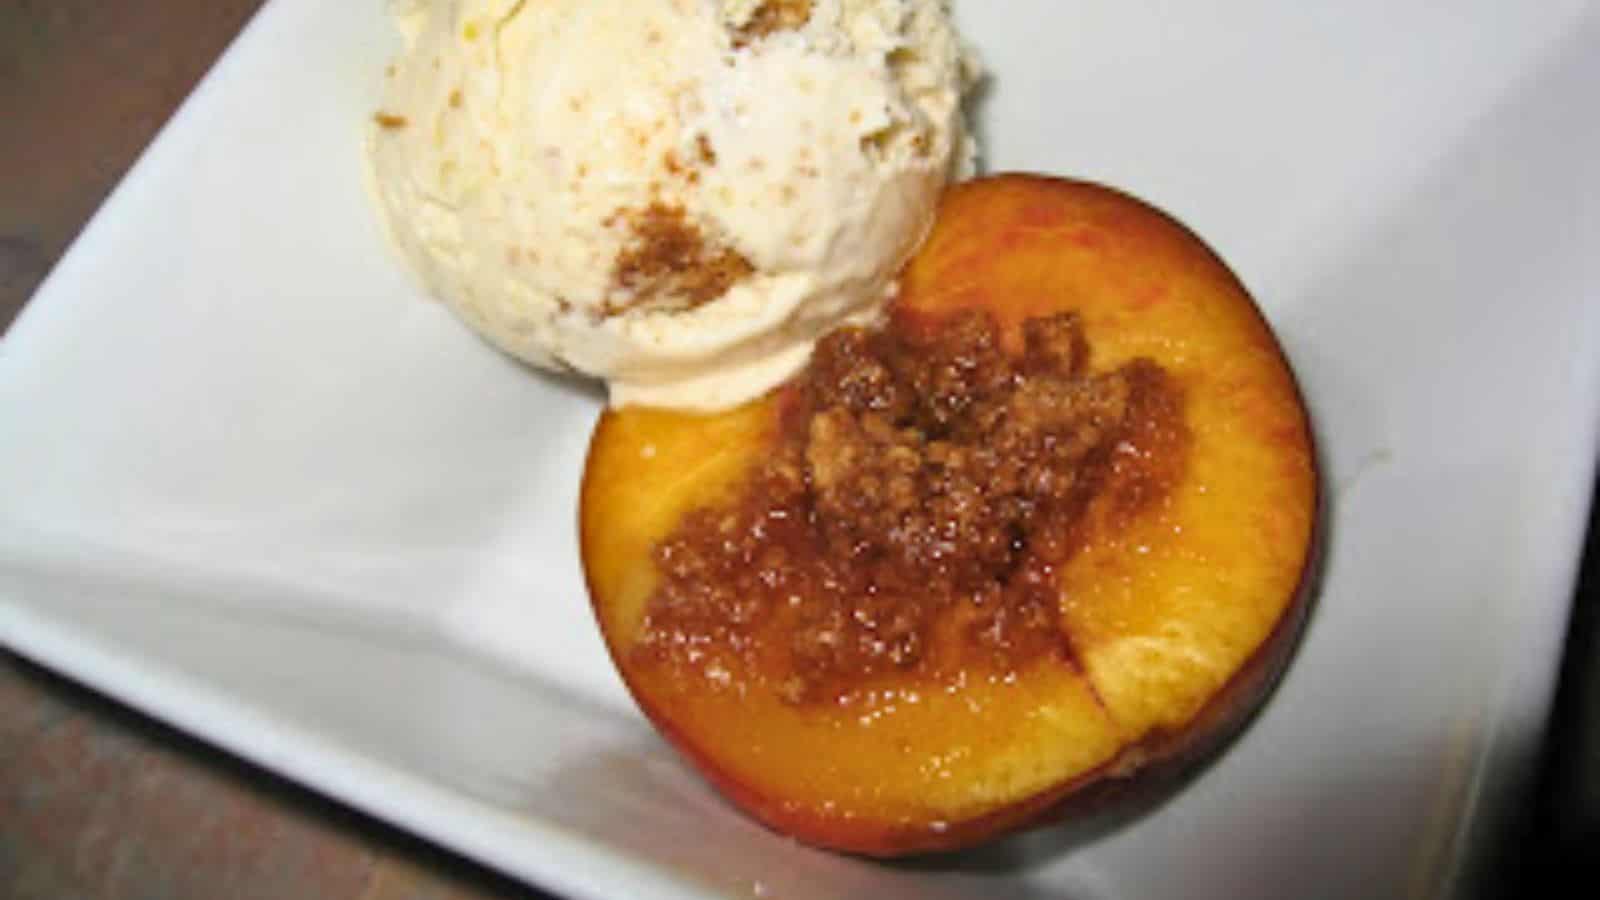 Image shows A baked peach with a scoop of ice cream.